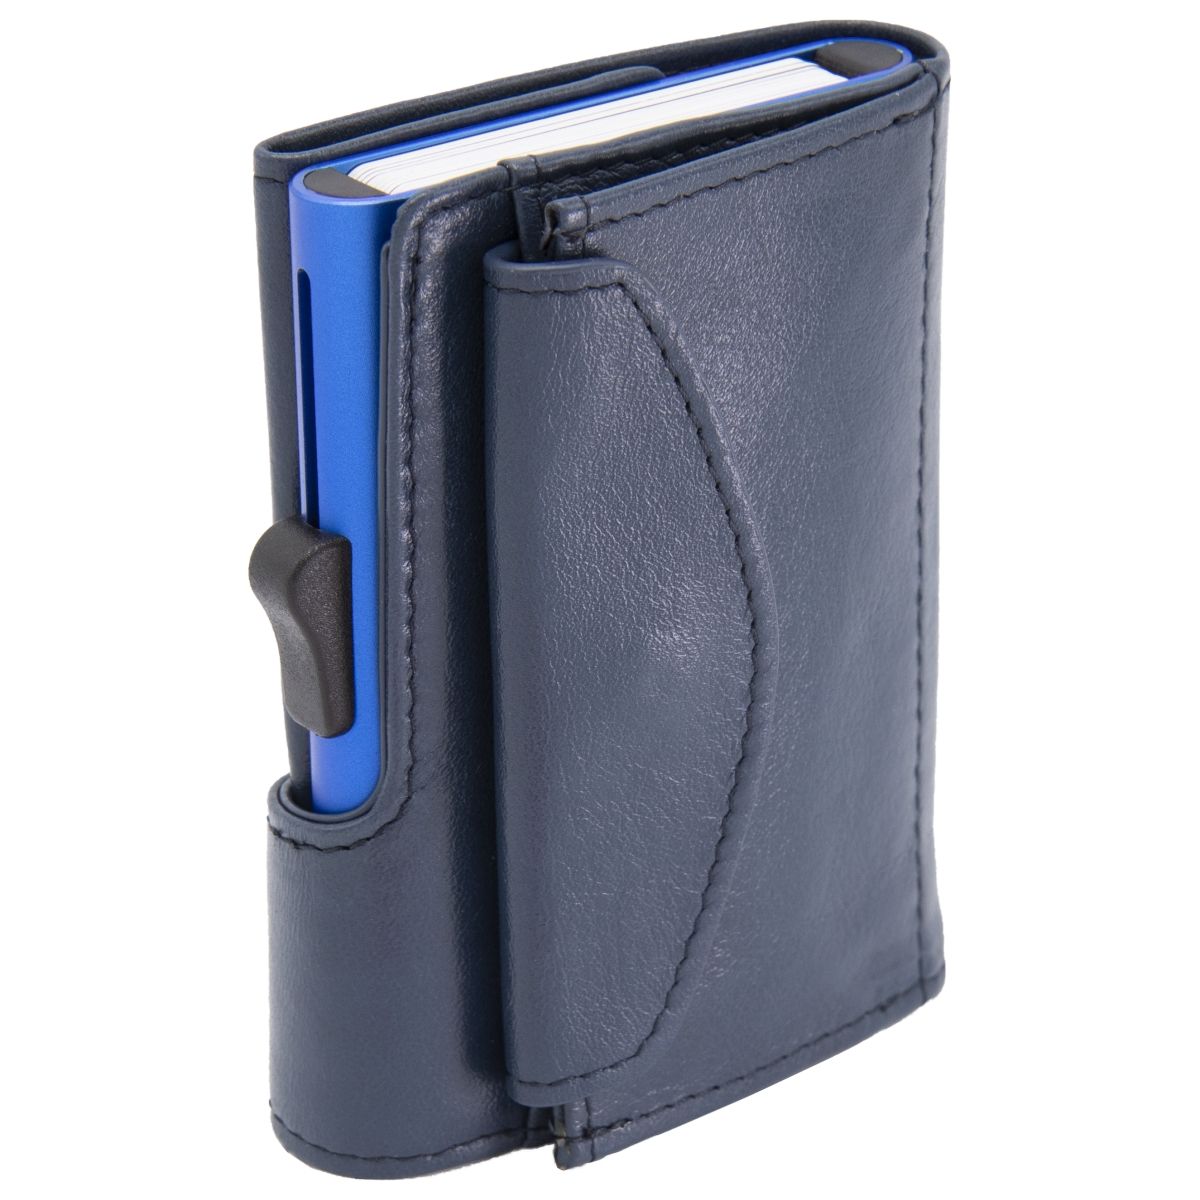 C-Secure XL Aluminum Wallet with Genuine Leather and Coins Pocket - Blue